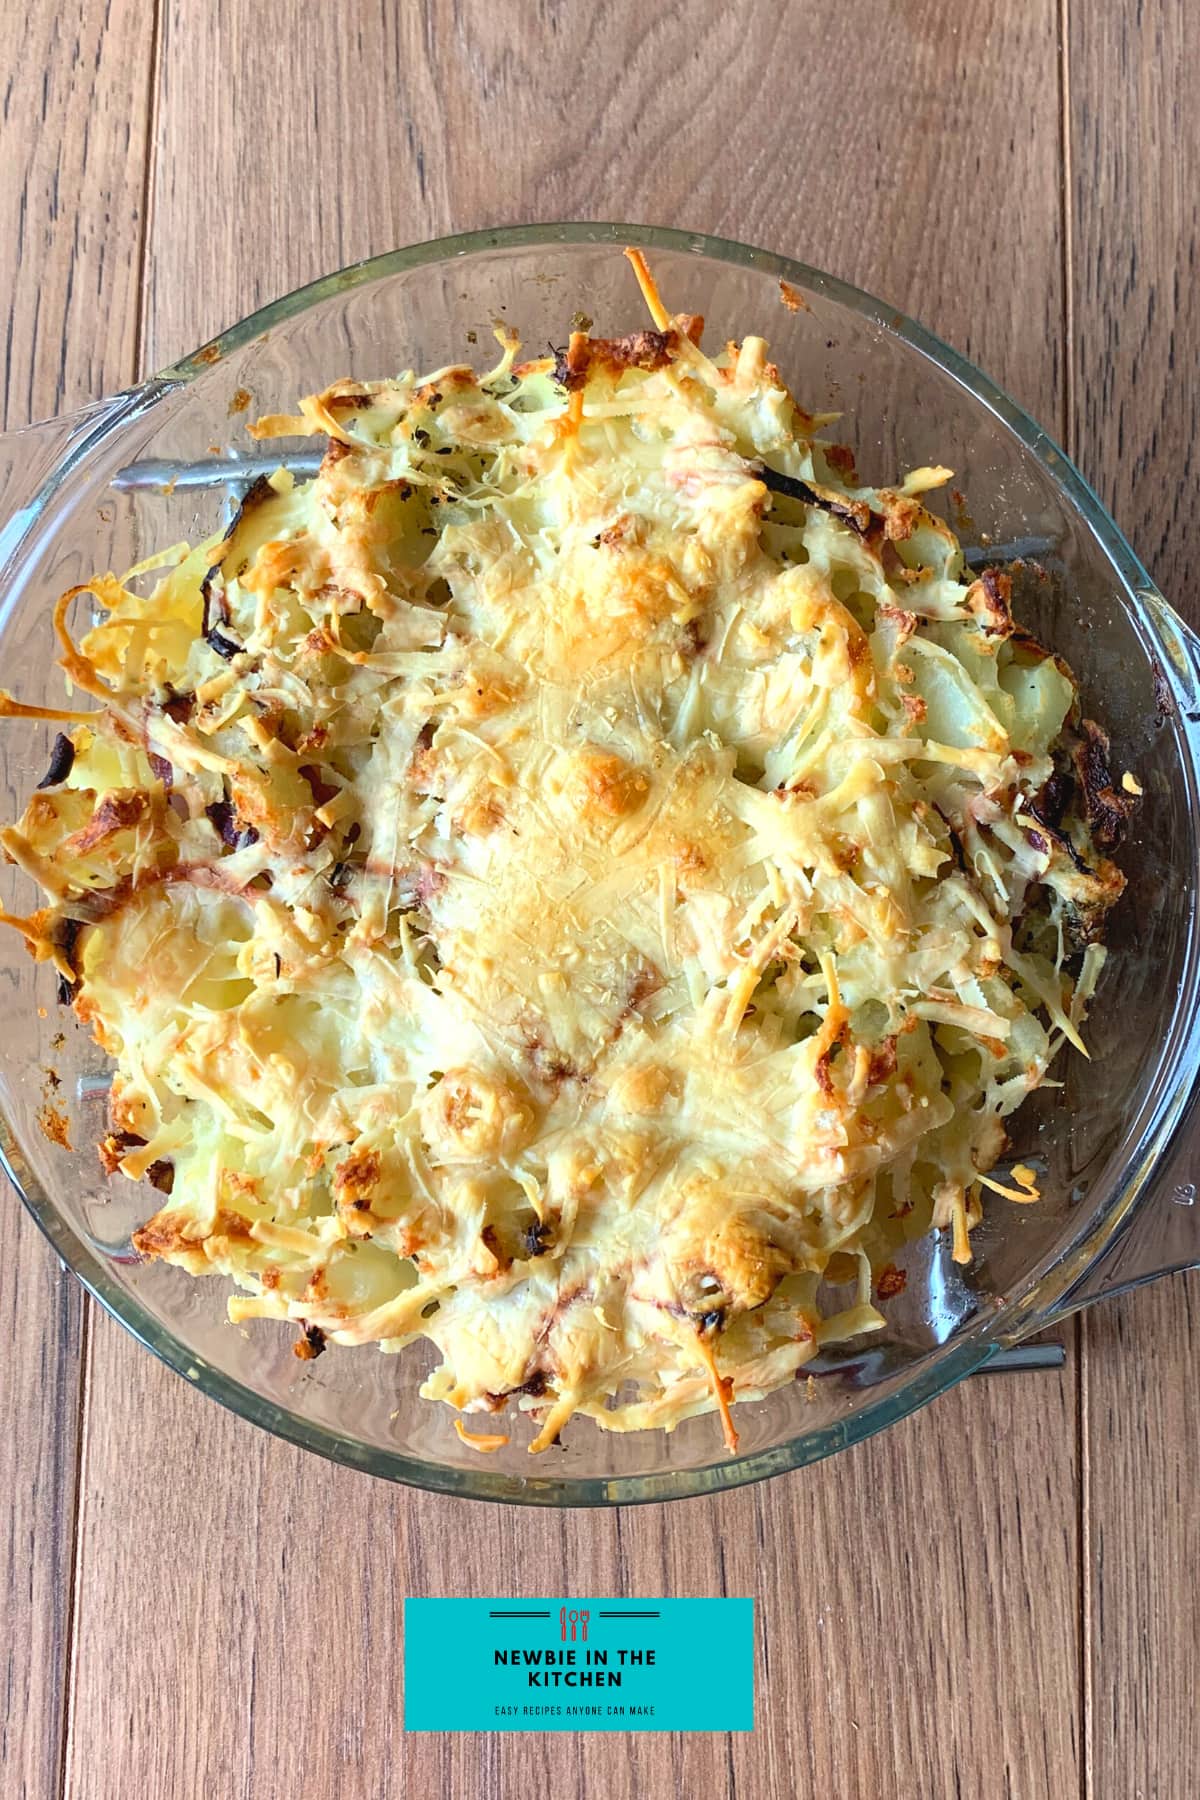 Cheesy Oven-Baked Garlic Potatoes. A simple, easy side dish recipe, with fluffy potatoes, cheese, and onions, baked in a tasty garlic and herb mix. The perfect cheesy potato bake!